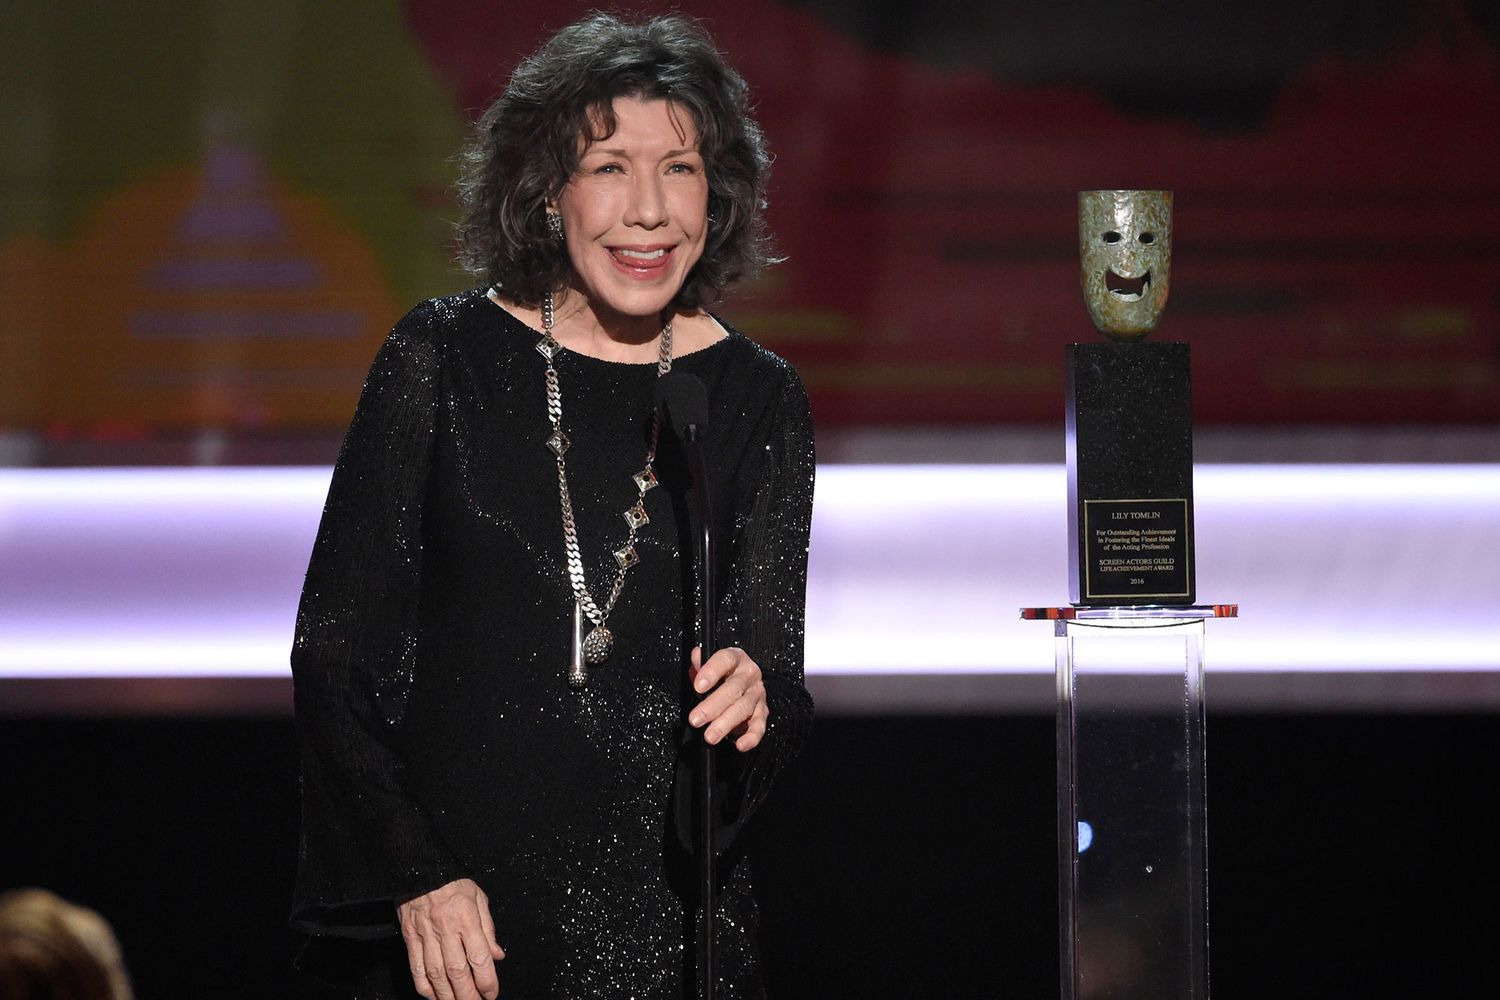 LILY TOMLIN GIVES EVERYONE SOME SAGE ADVICE